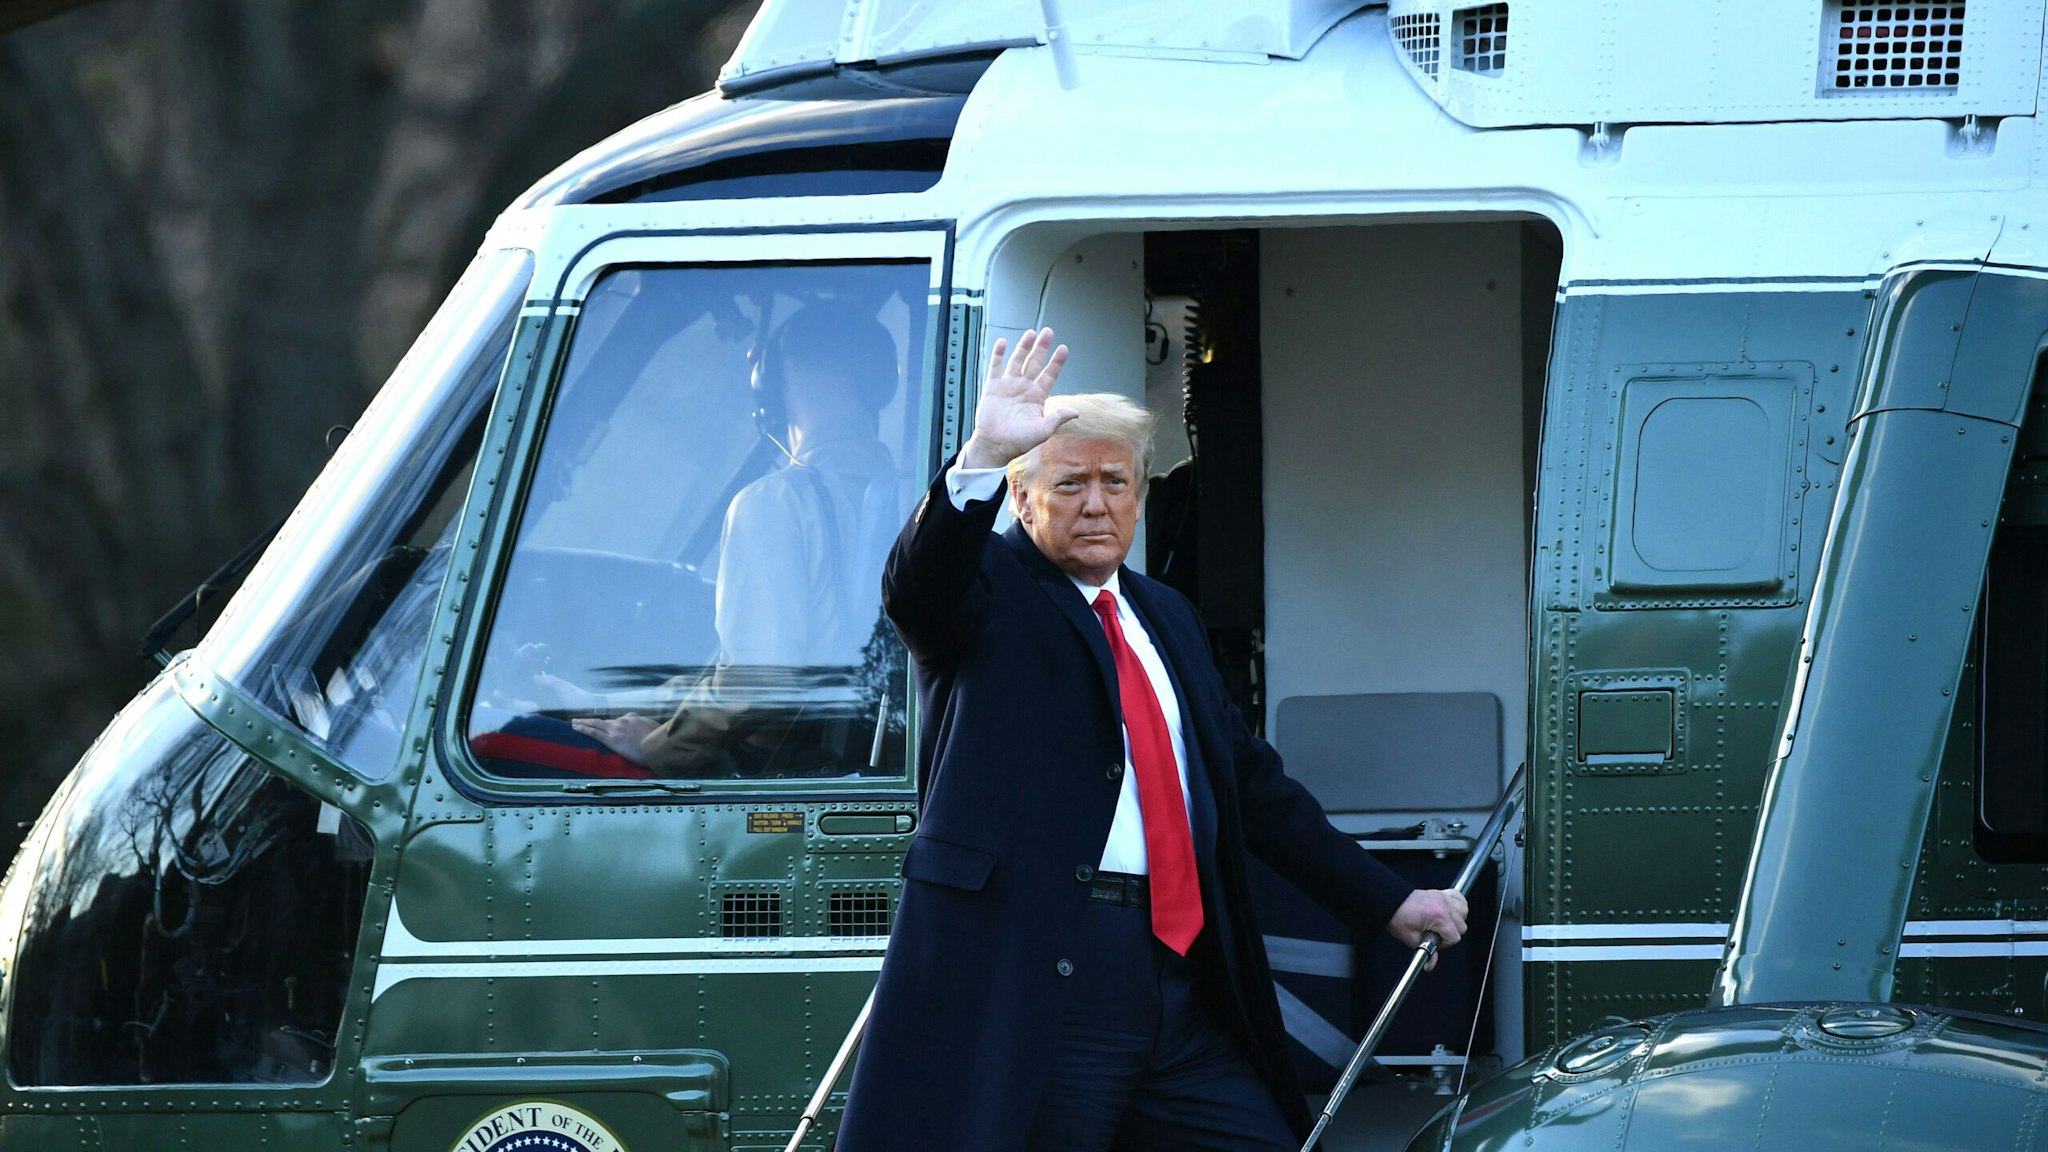 TOPSHOT - Outgoing US President Donald Trump waves as he boards Marine One at the White House in Washington, DC, on January 20, 2021. - President Trump travels his Mar-a-Lago golf club residence in Palm Beach, Florida, and will not attend the inauguration for President-elect Joe Biden.